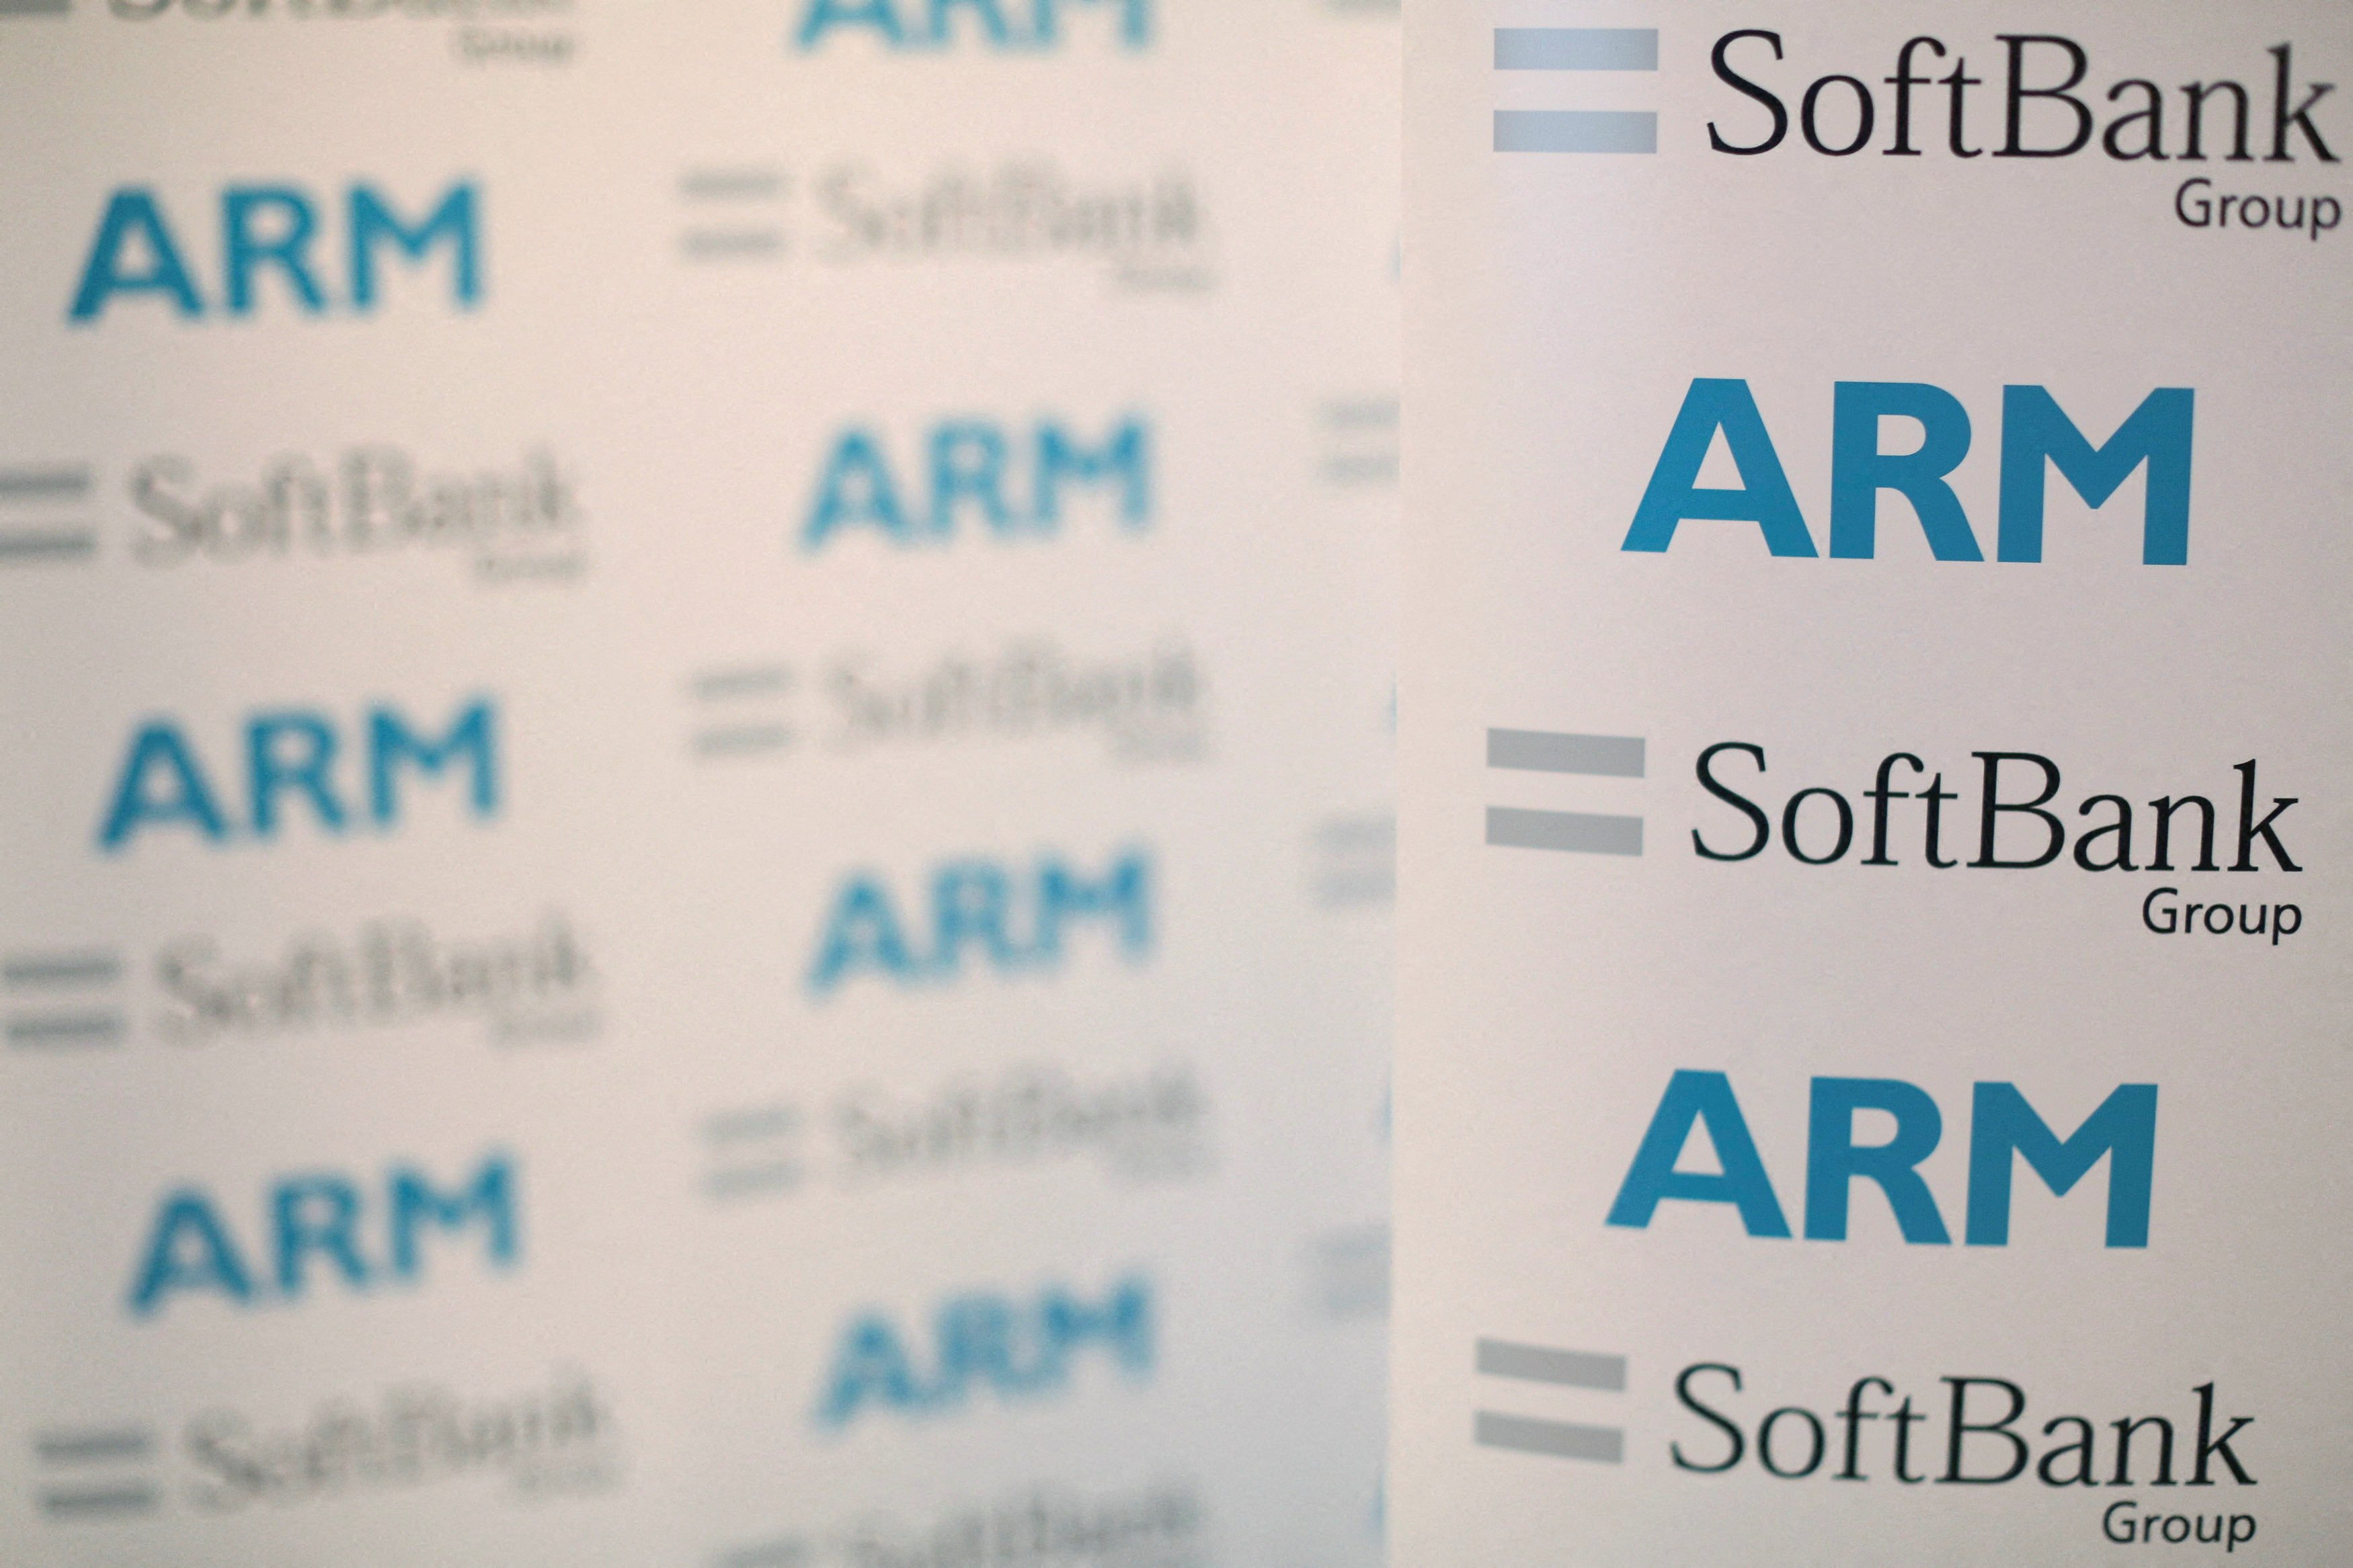 An Arm and SoftBank Group Corp-branded board is seen displayed at a news conference in London on July 18, 2016. Photo: Reuters